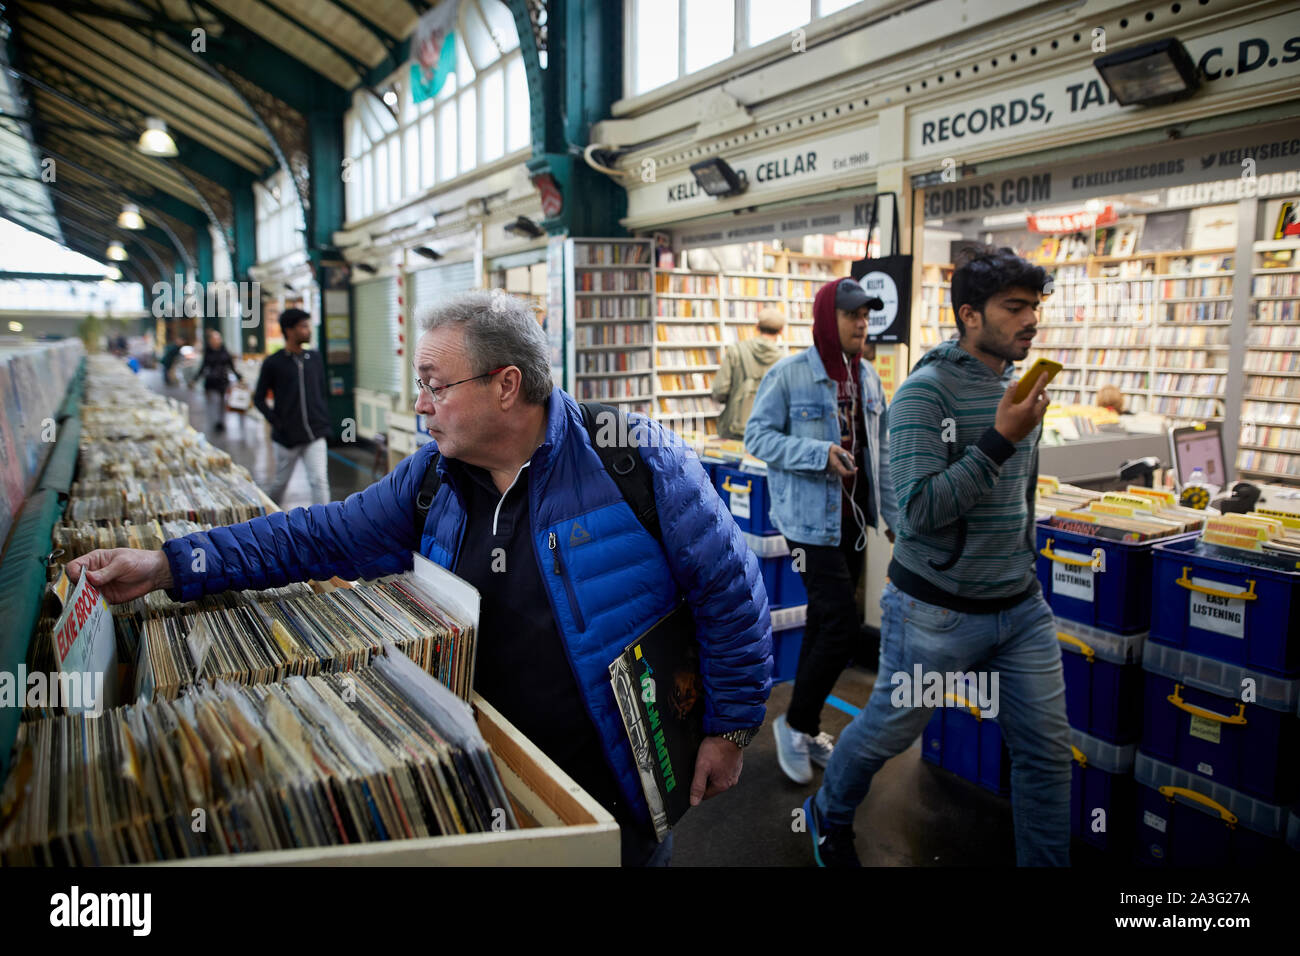 Cardiff Wales, inside the old Central Market hall off  High Street man buying vinyl records at a second hand stall Stock Photo